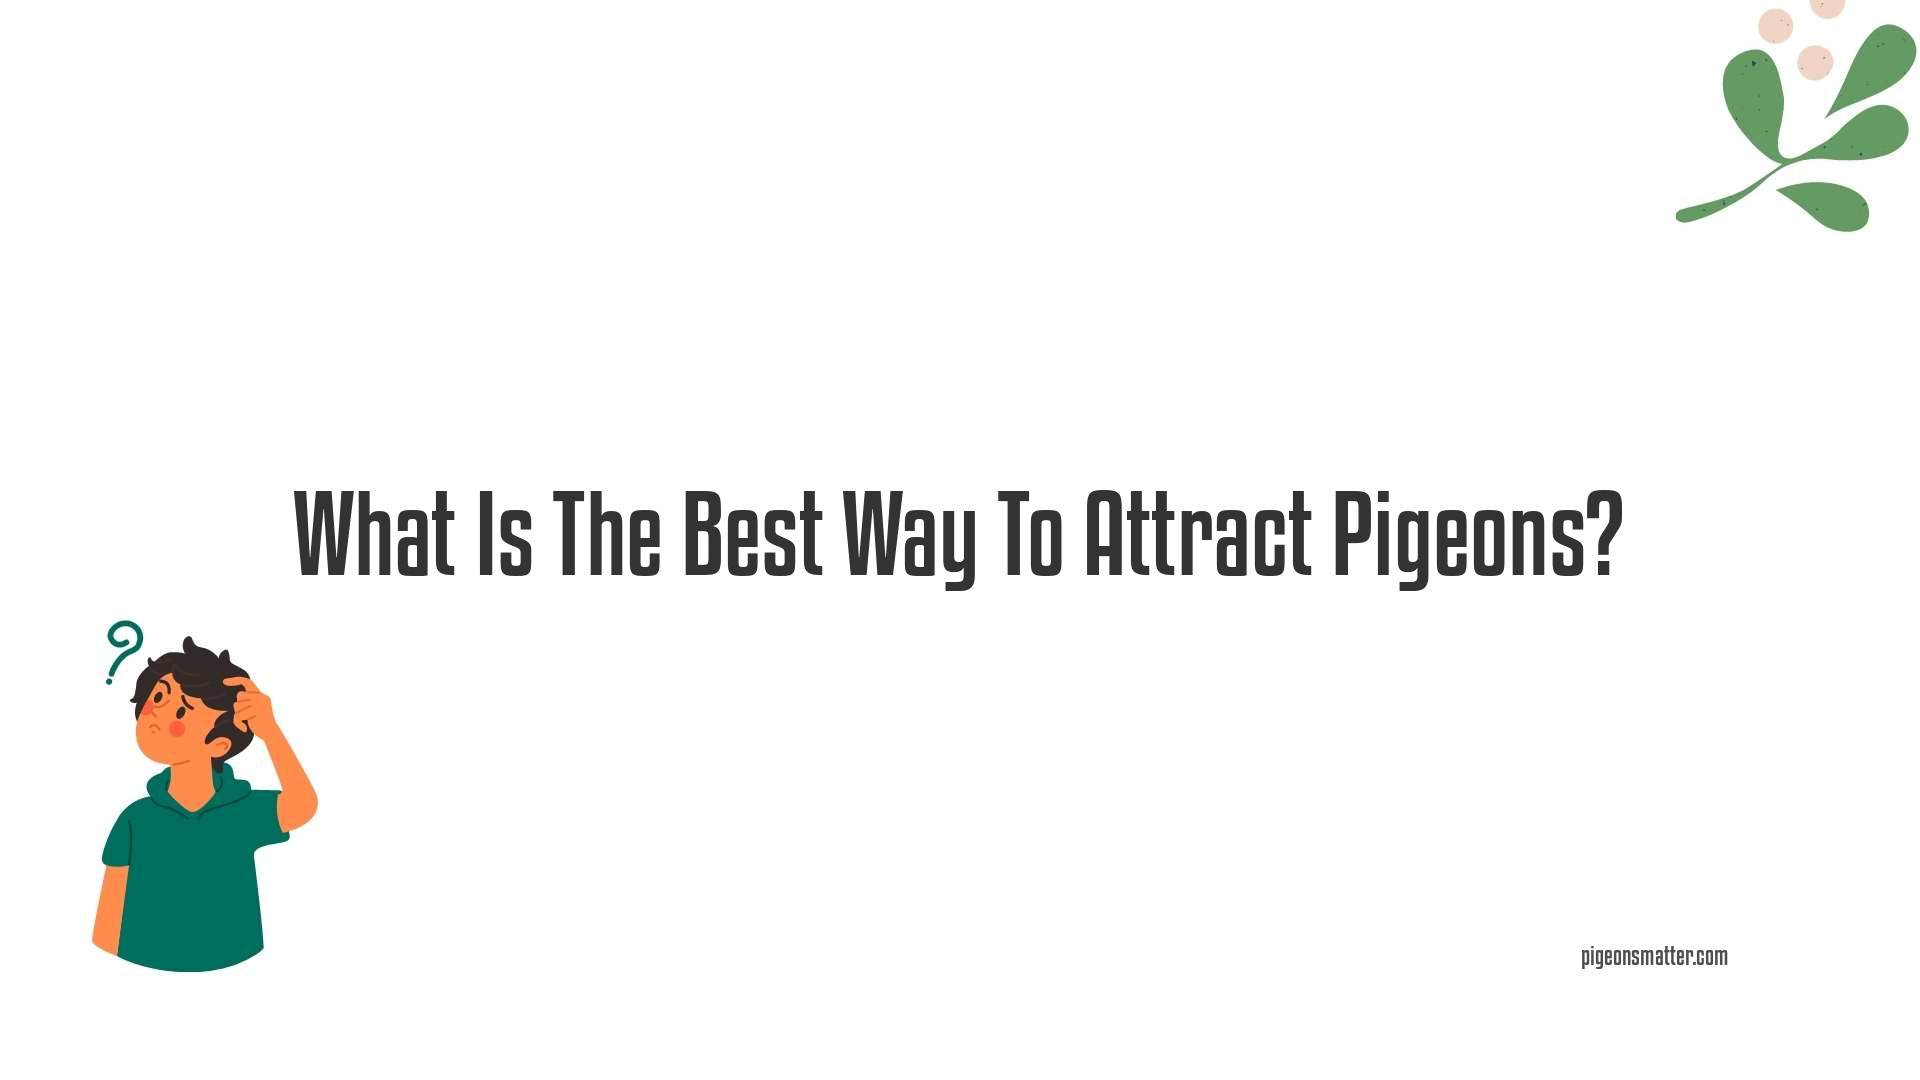 What Is The Best Way To Attract Pigeons?